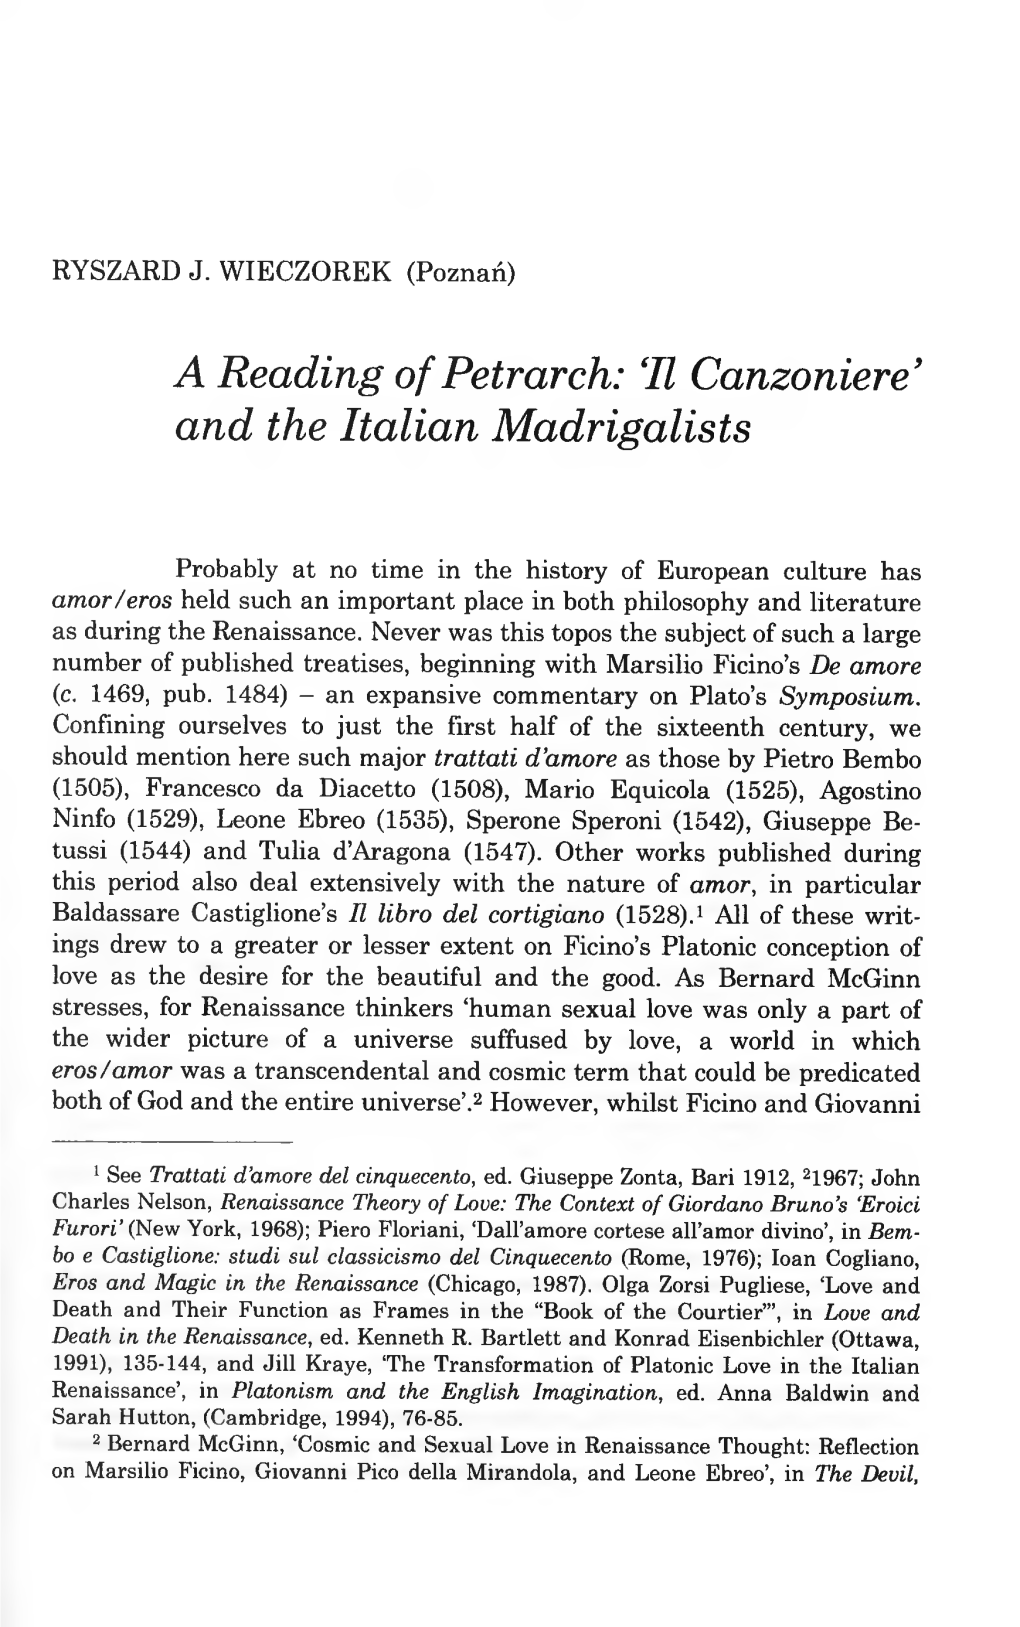 A Reading of Petrarch: II Canzoniere ' and the Italian Madrigalists